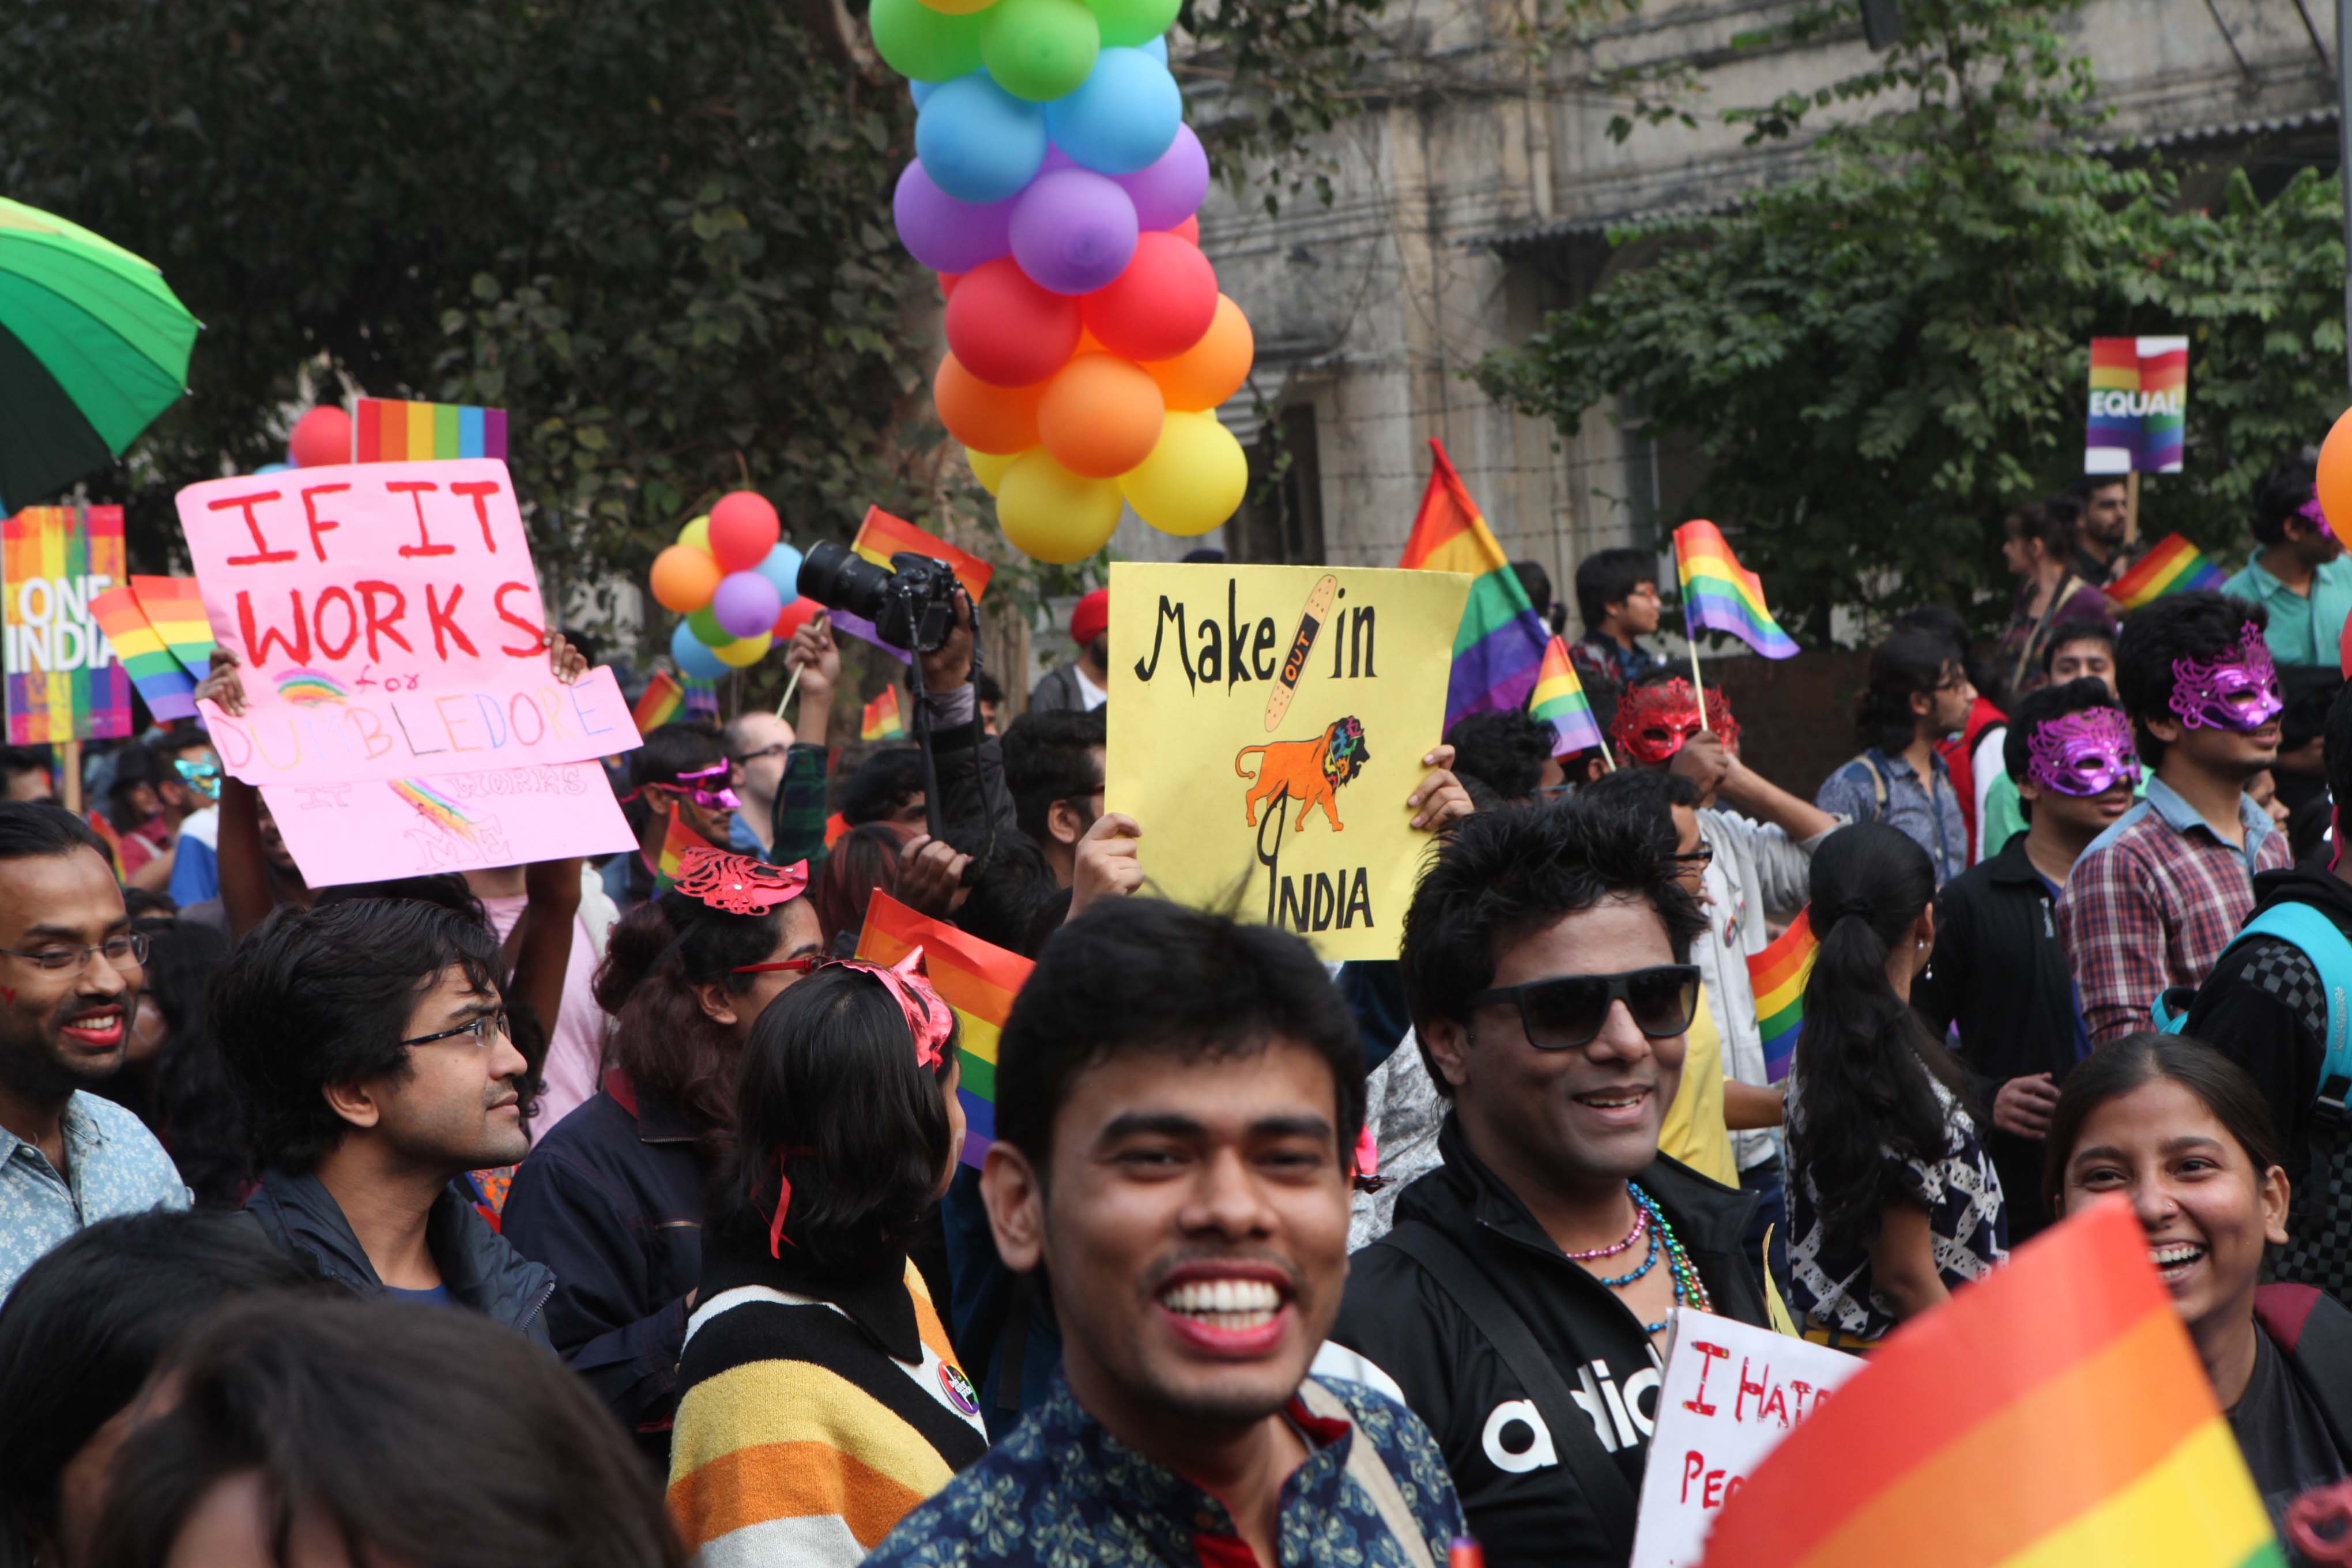 Delhi Queer Pride Parade Thousands March For Equality And A Life